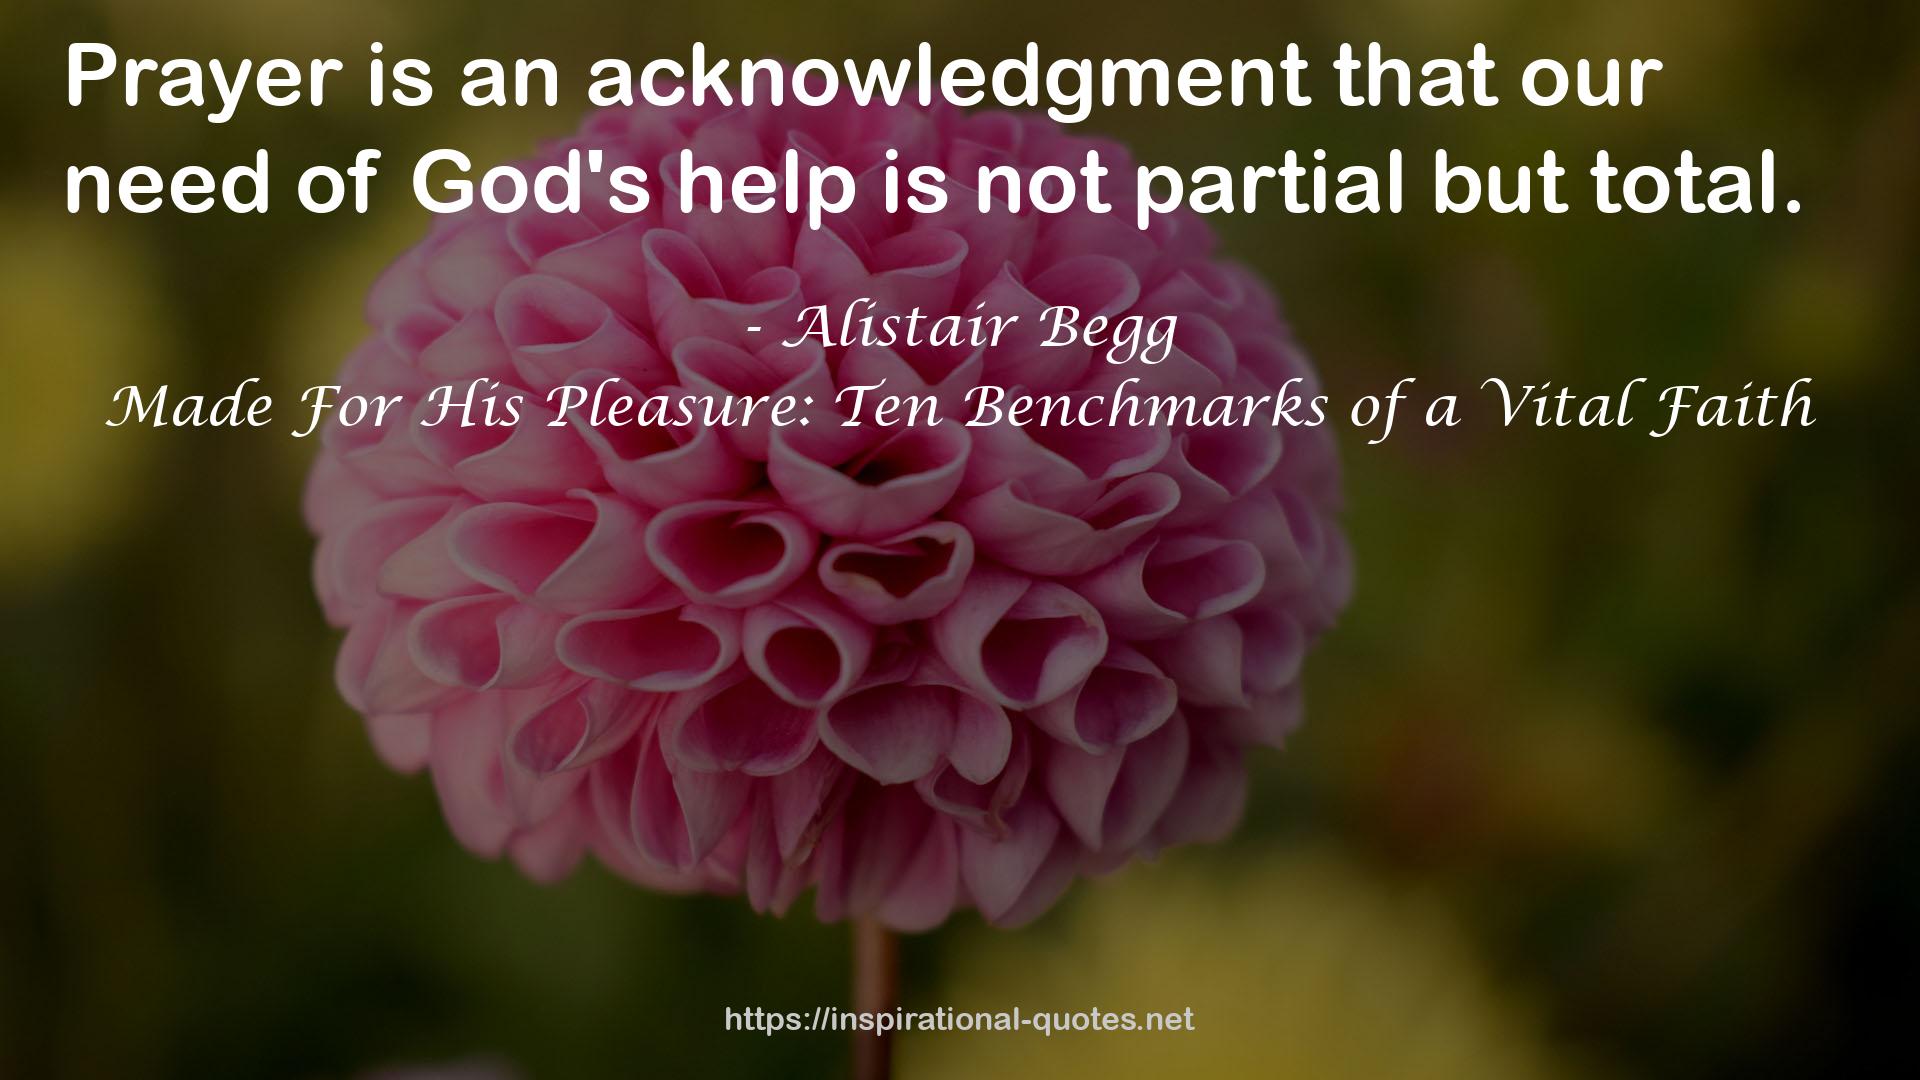 Alistair Begg QUOTES